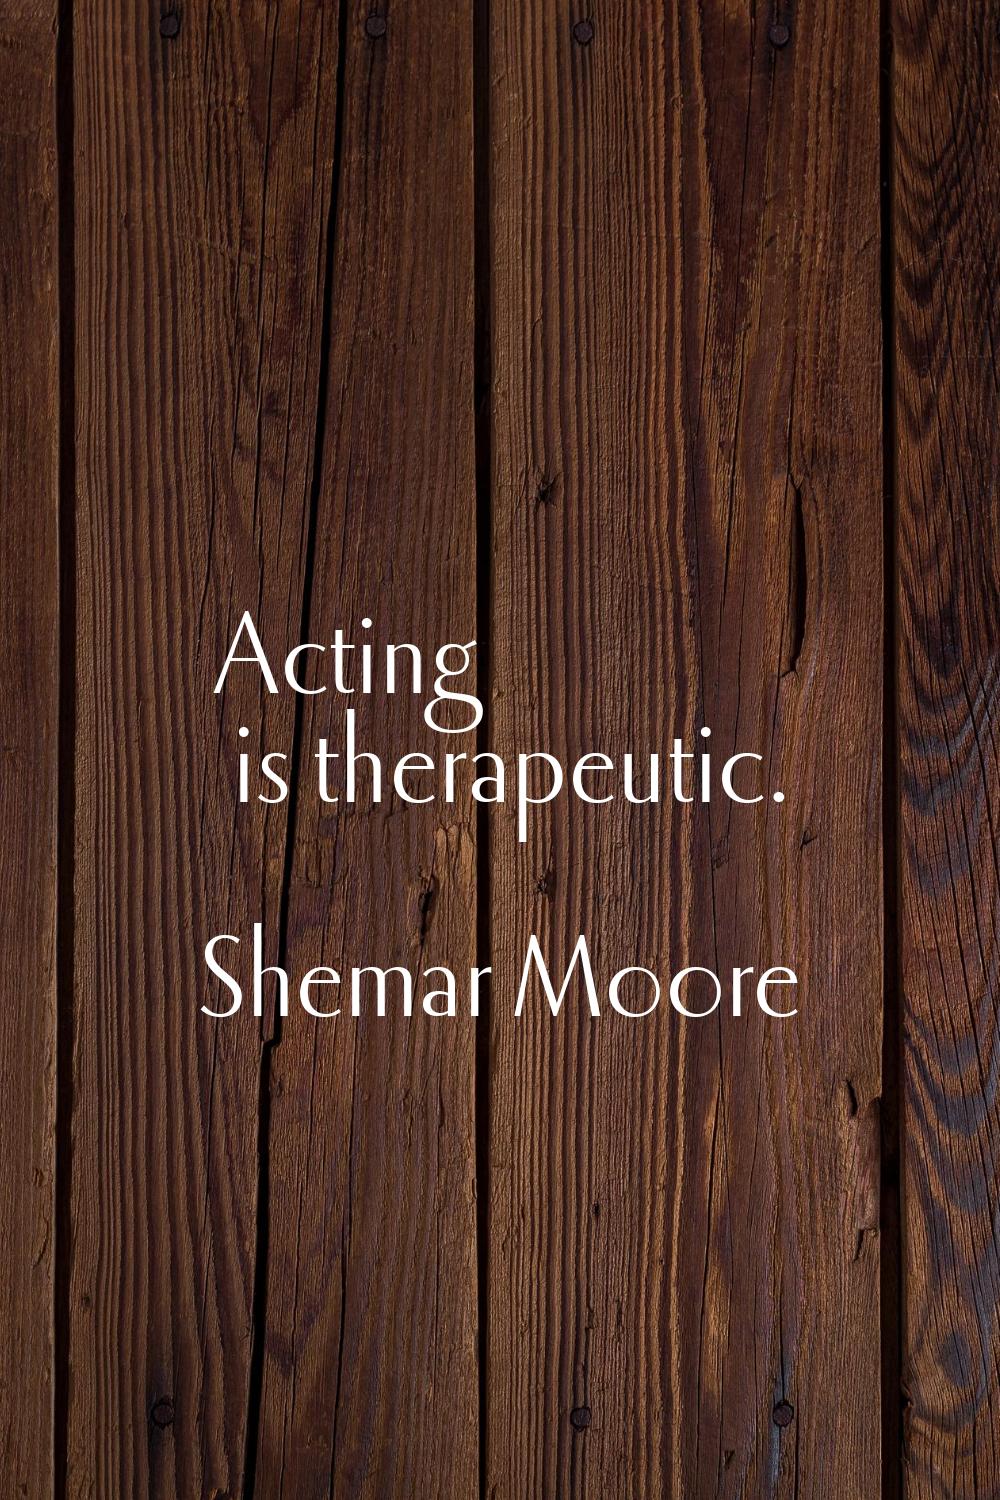 Acting is therapeutic.